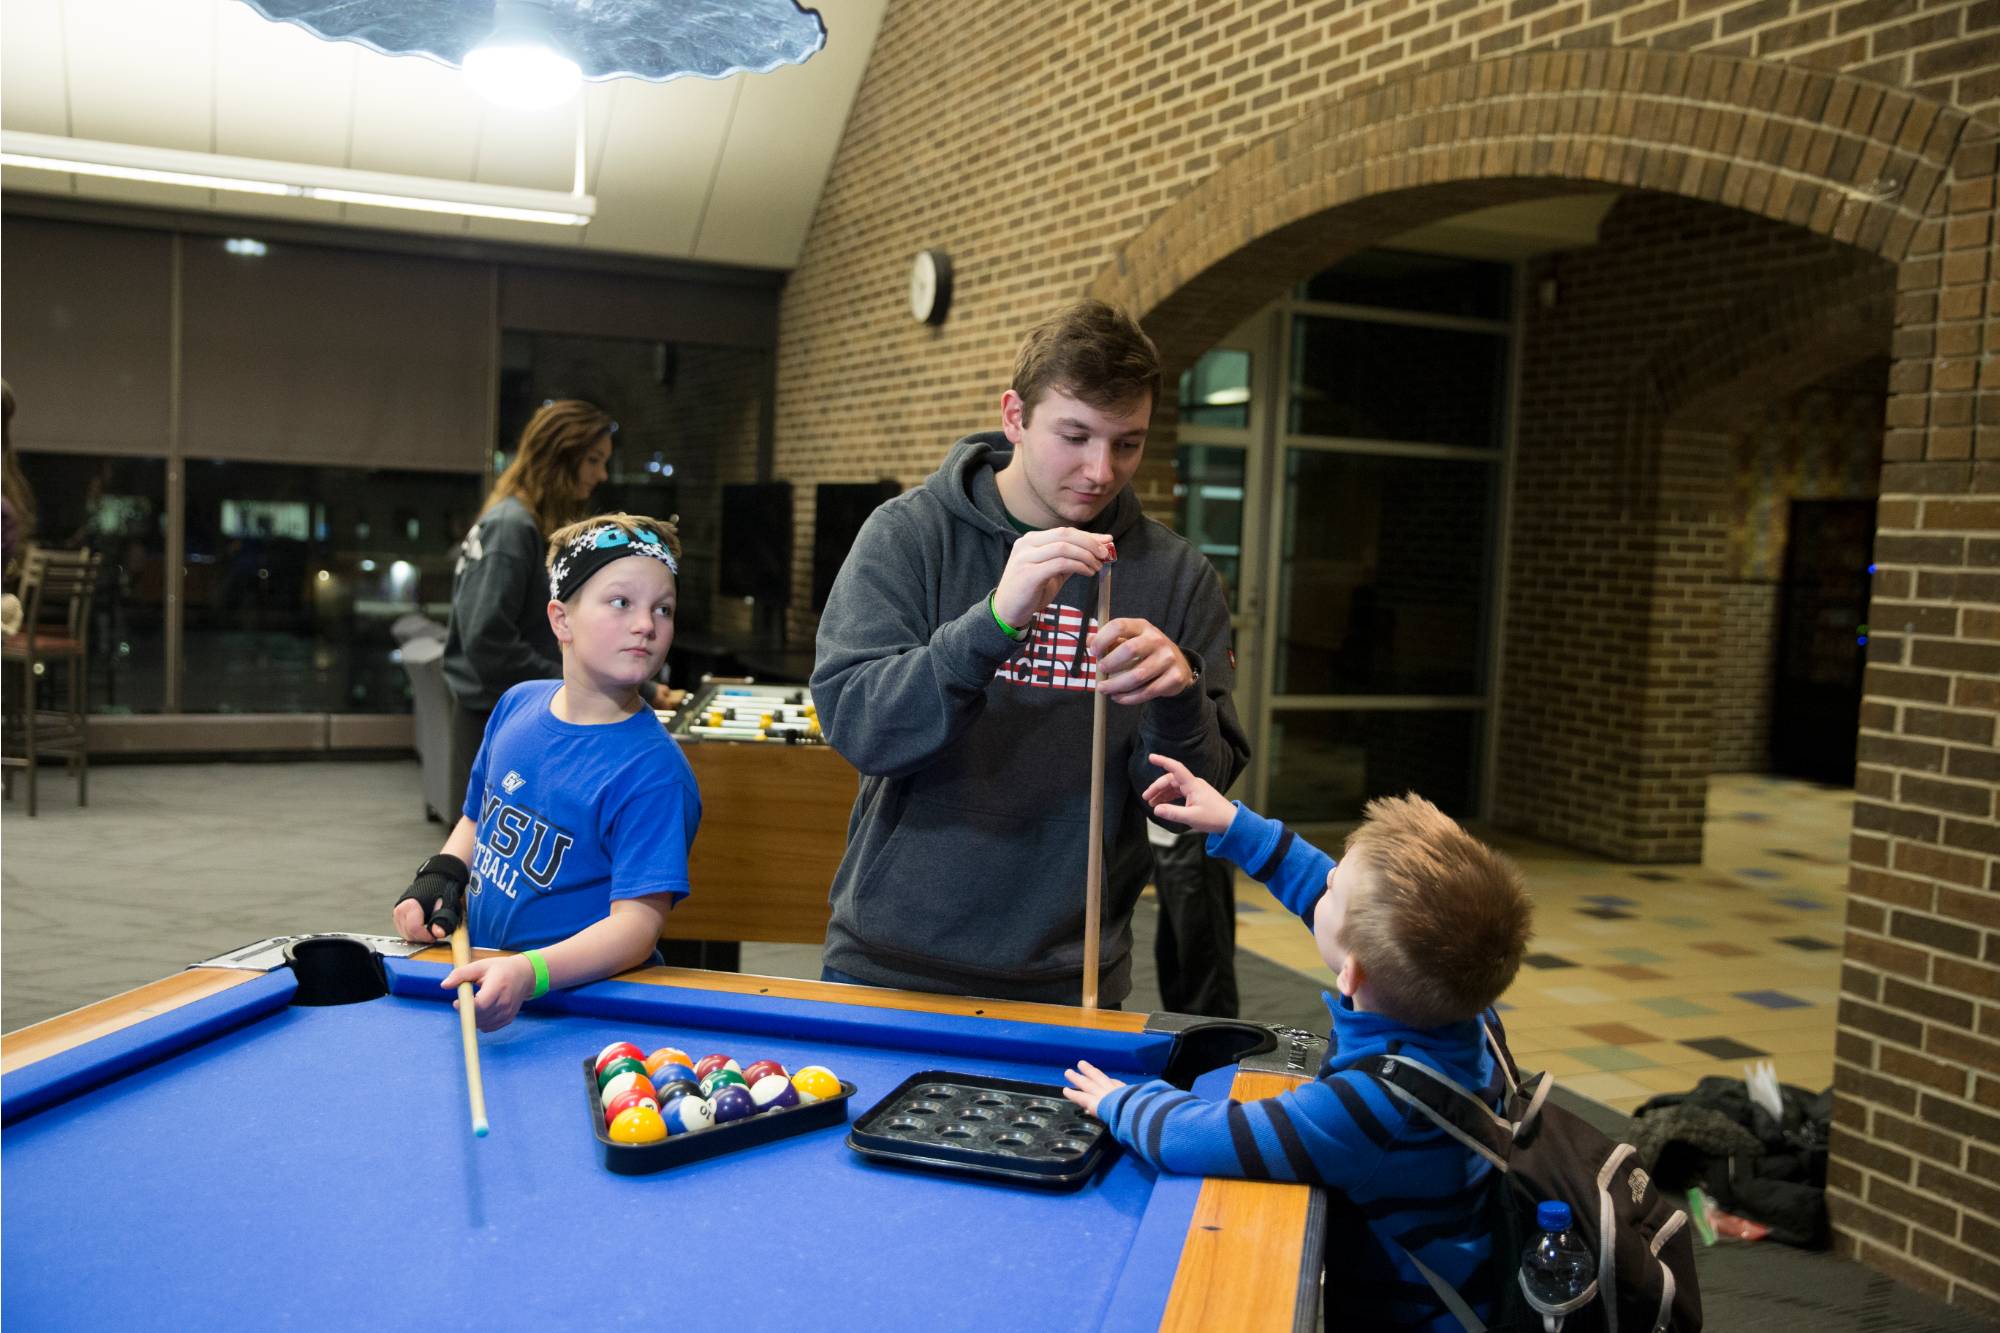 Young siblings and their older brother preparing for a game of pool at the Kirkhof Center